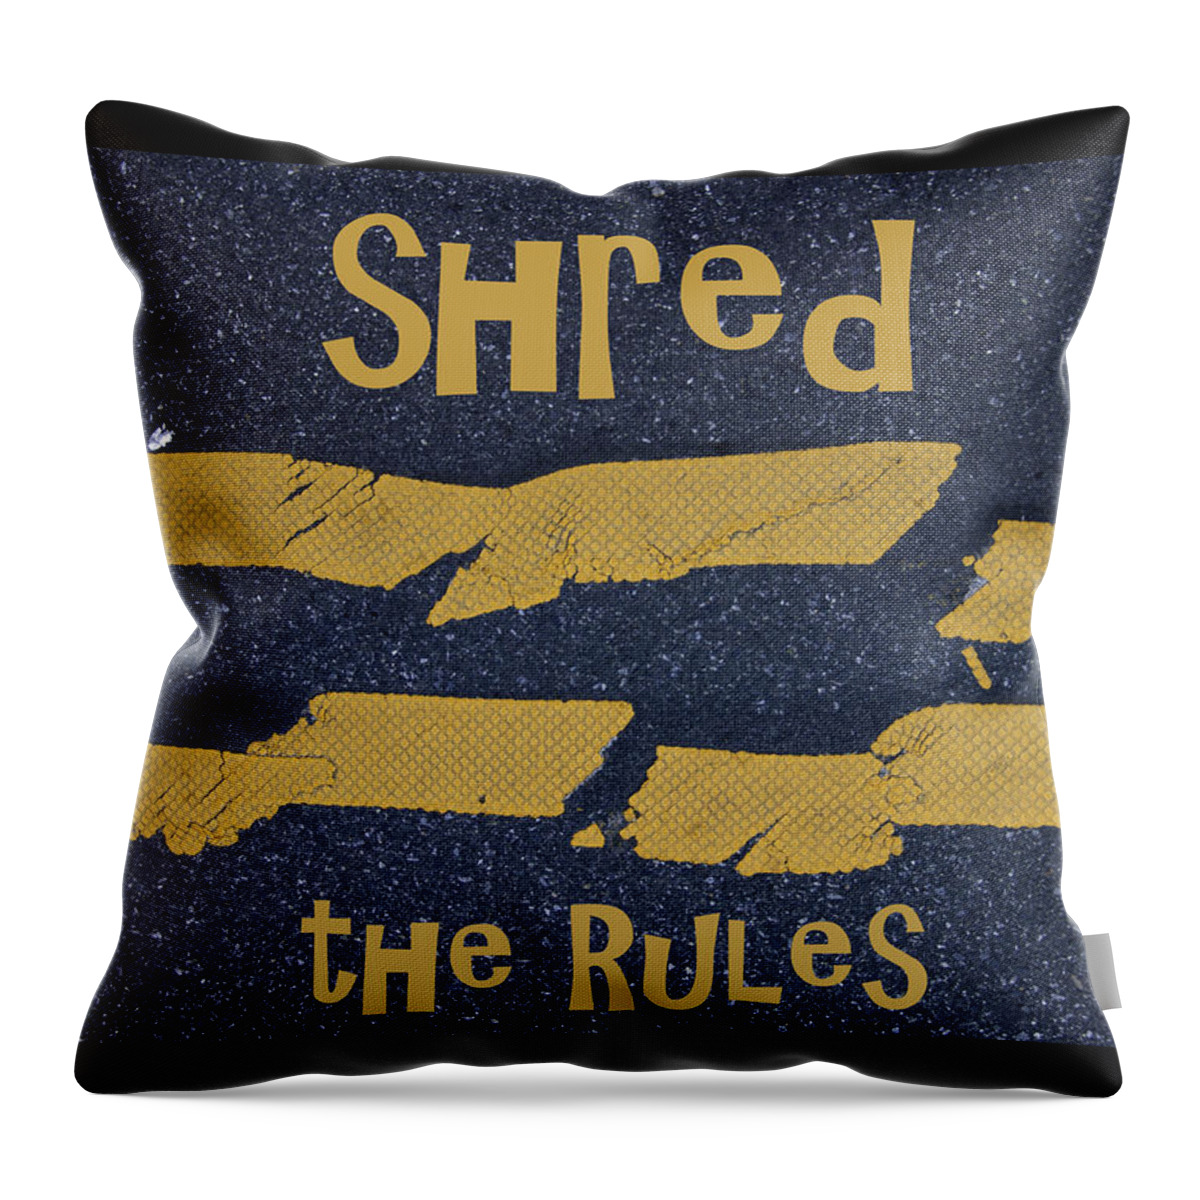 Shred The Rules Throw Pillow featuring the photograph Shred the Rules by John Harmon